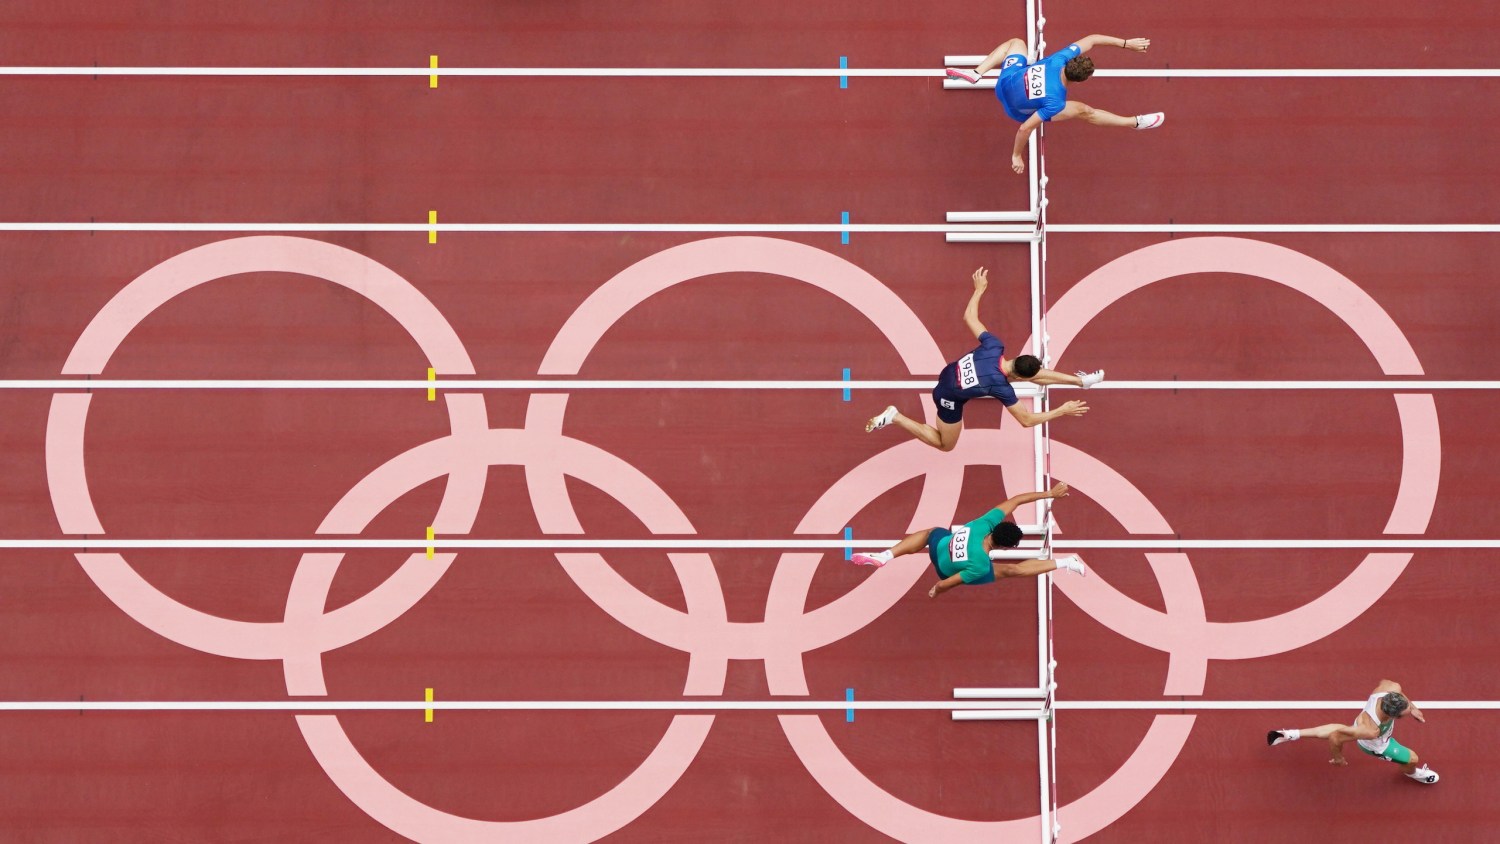 Tokyo 2020 Olympics - Athletics - Men's 400m Hurdles - Round 1 - OLS - Olympic Stadium, Tokyo, Japan - July 30, 2021. Athletes compete as Olympic rings are seen REUTERS/Peter Jebautzke